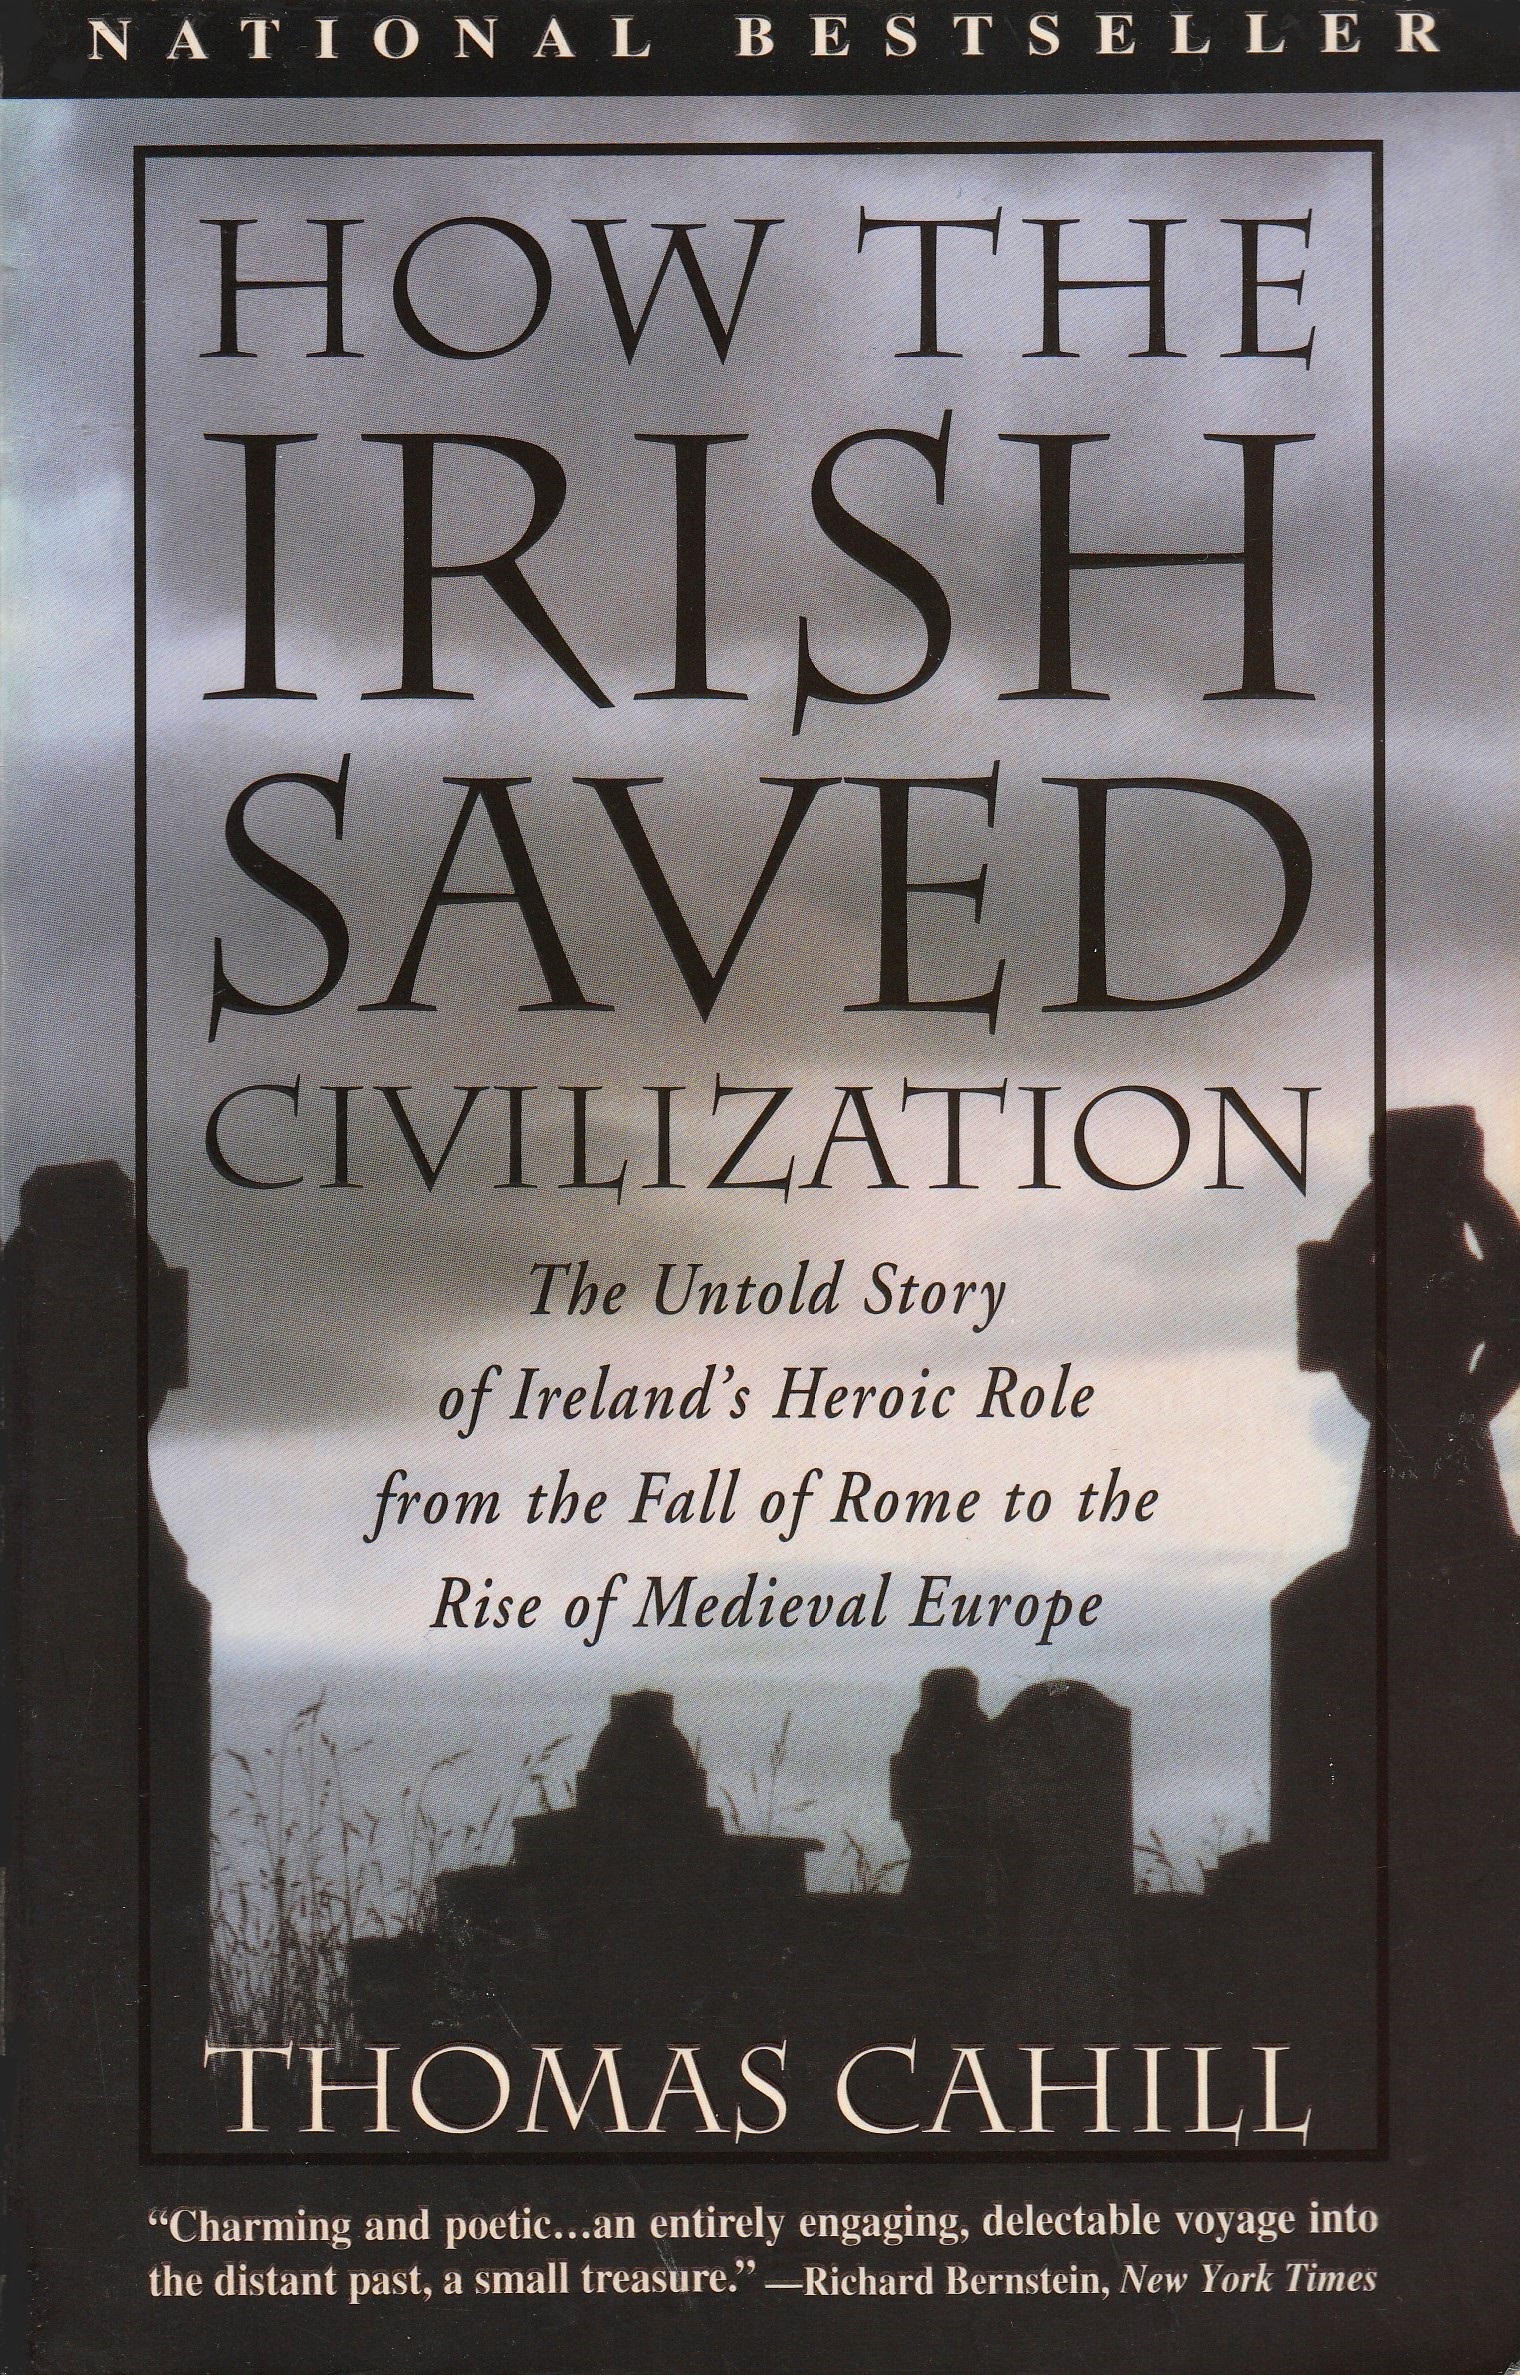 How the Irish Saved Civilization By Thomas Cahill